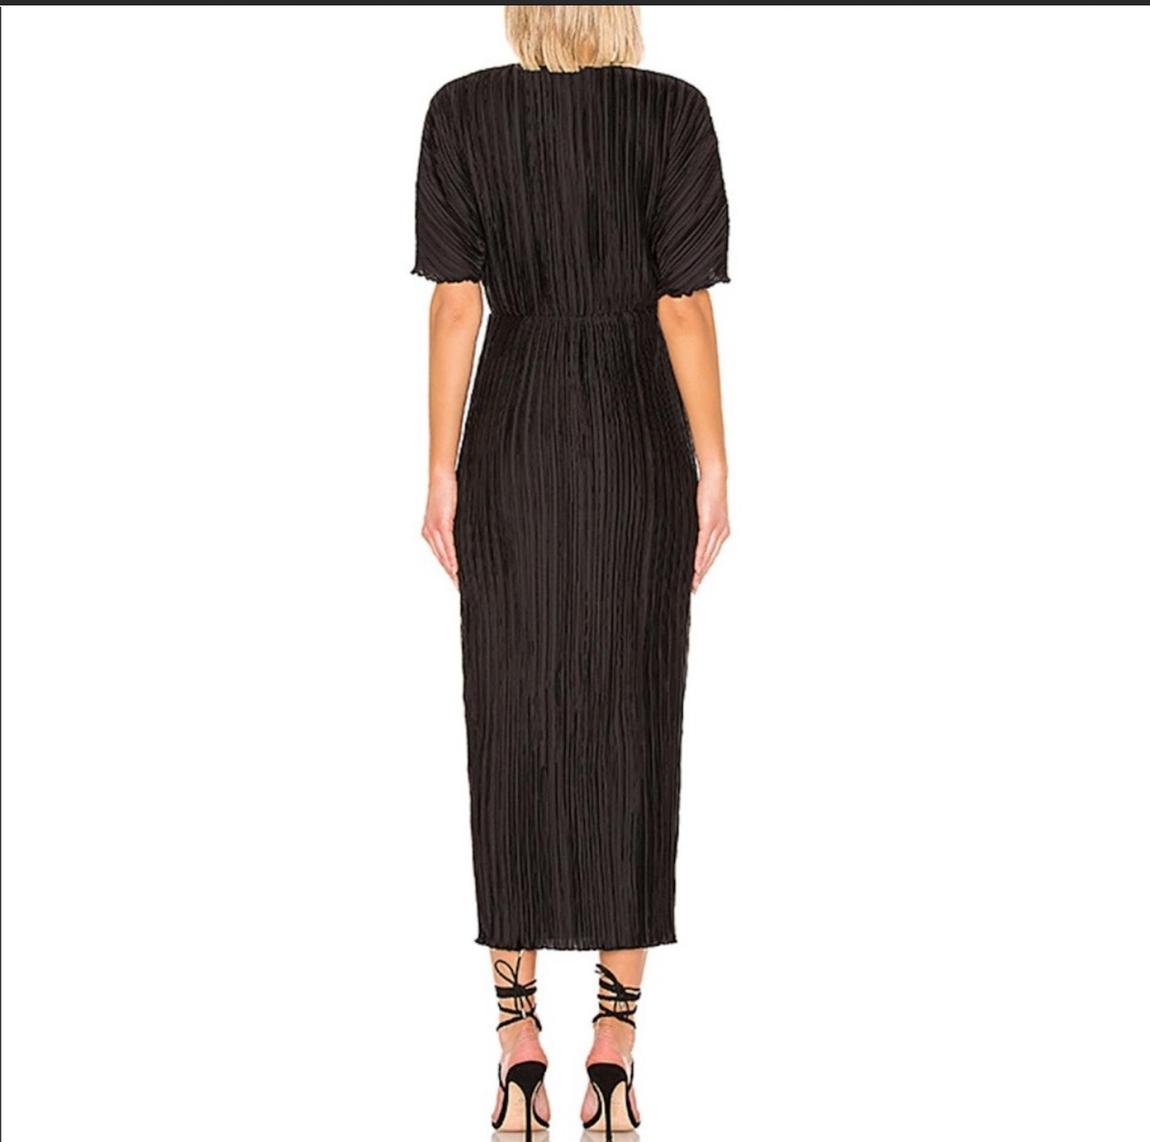 House of Harlow 1960 x REVOLVE Sabrina Dress Size 00 Fun Fashion Black Cocktail Dress on Queenly